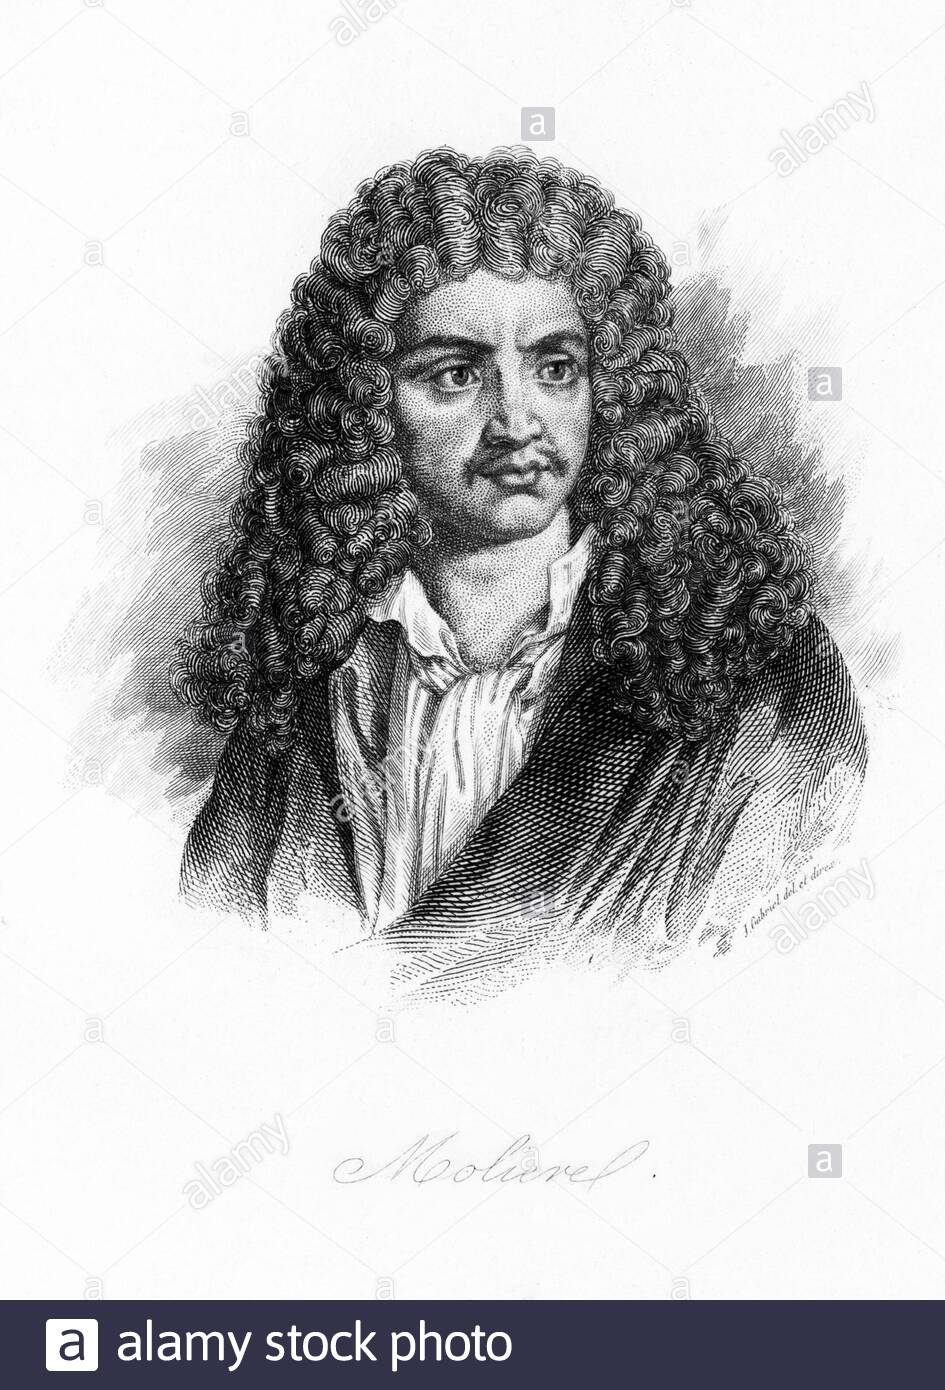 Jean-Baptiste Poquelin, 1622 – 1673, known by his stage name Molière, was a French playwright, actor and poet, vintage illustration from 1881 Stock Photo